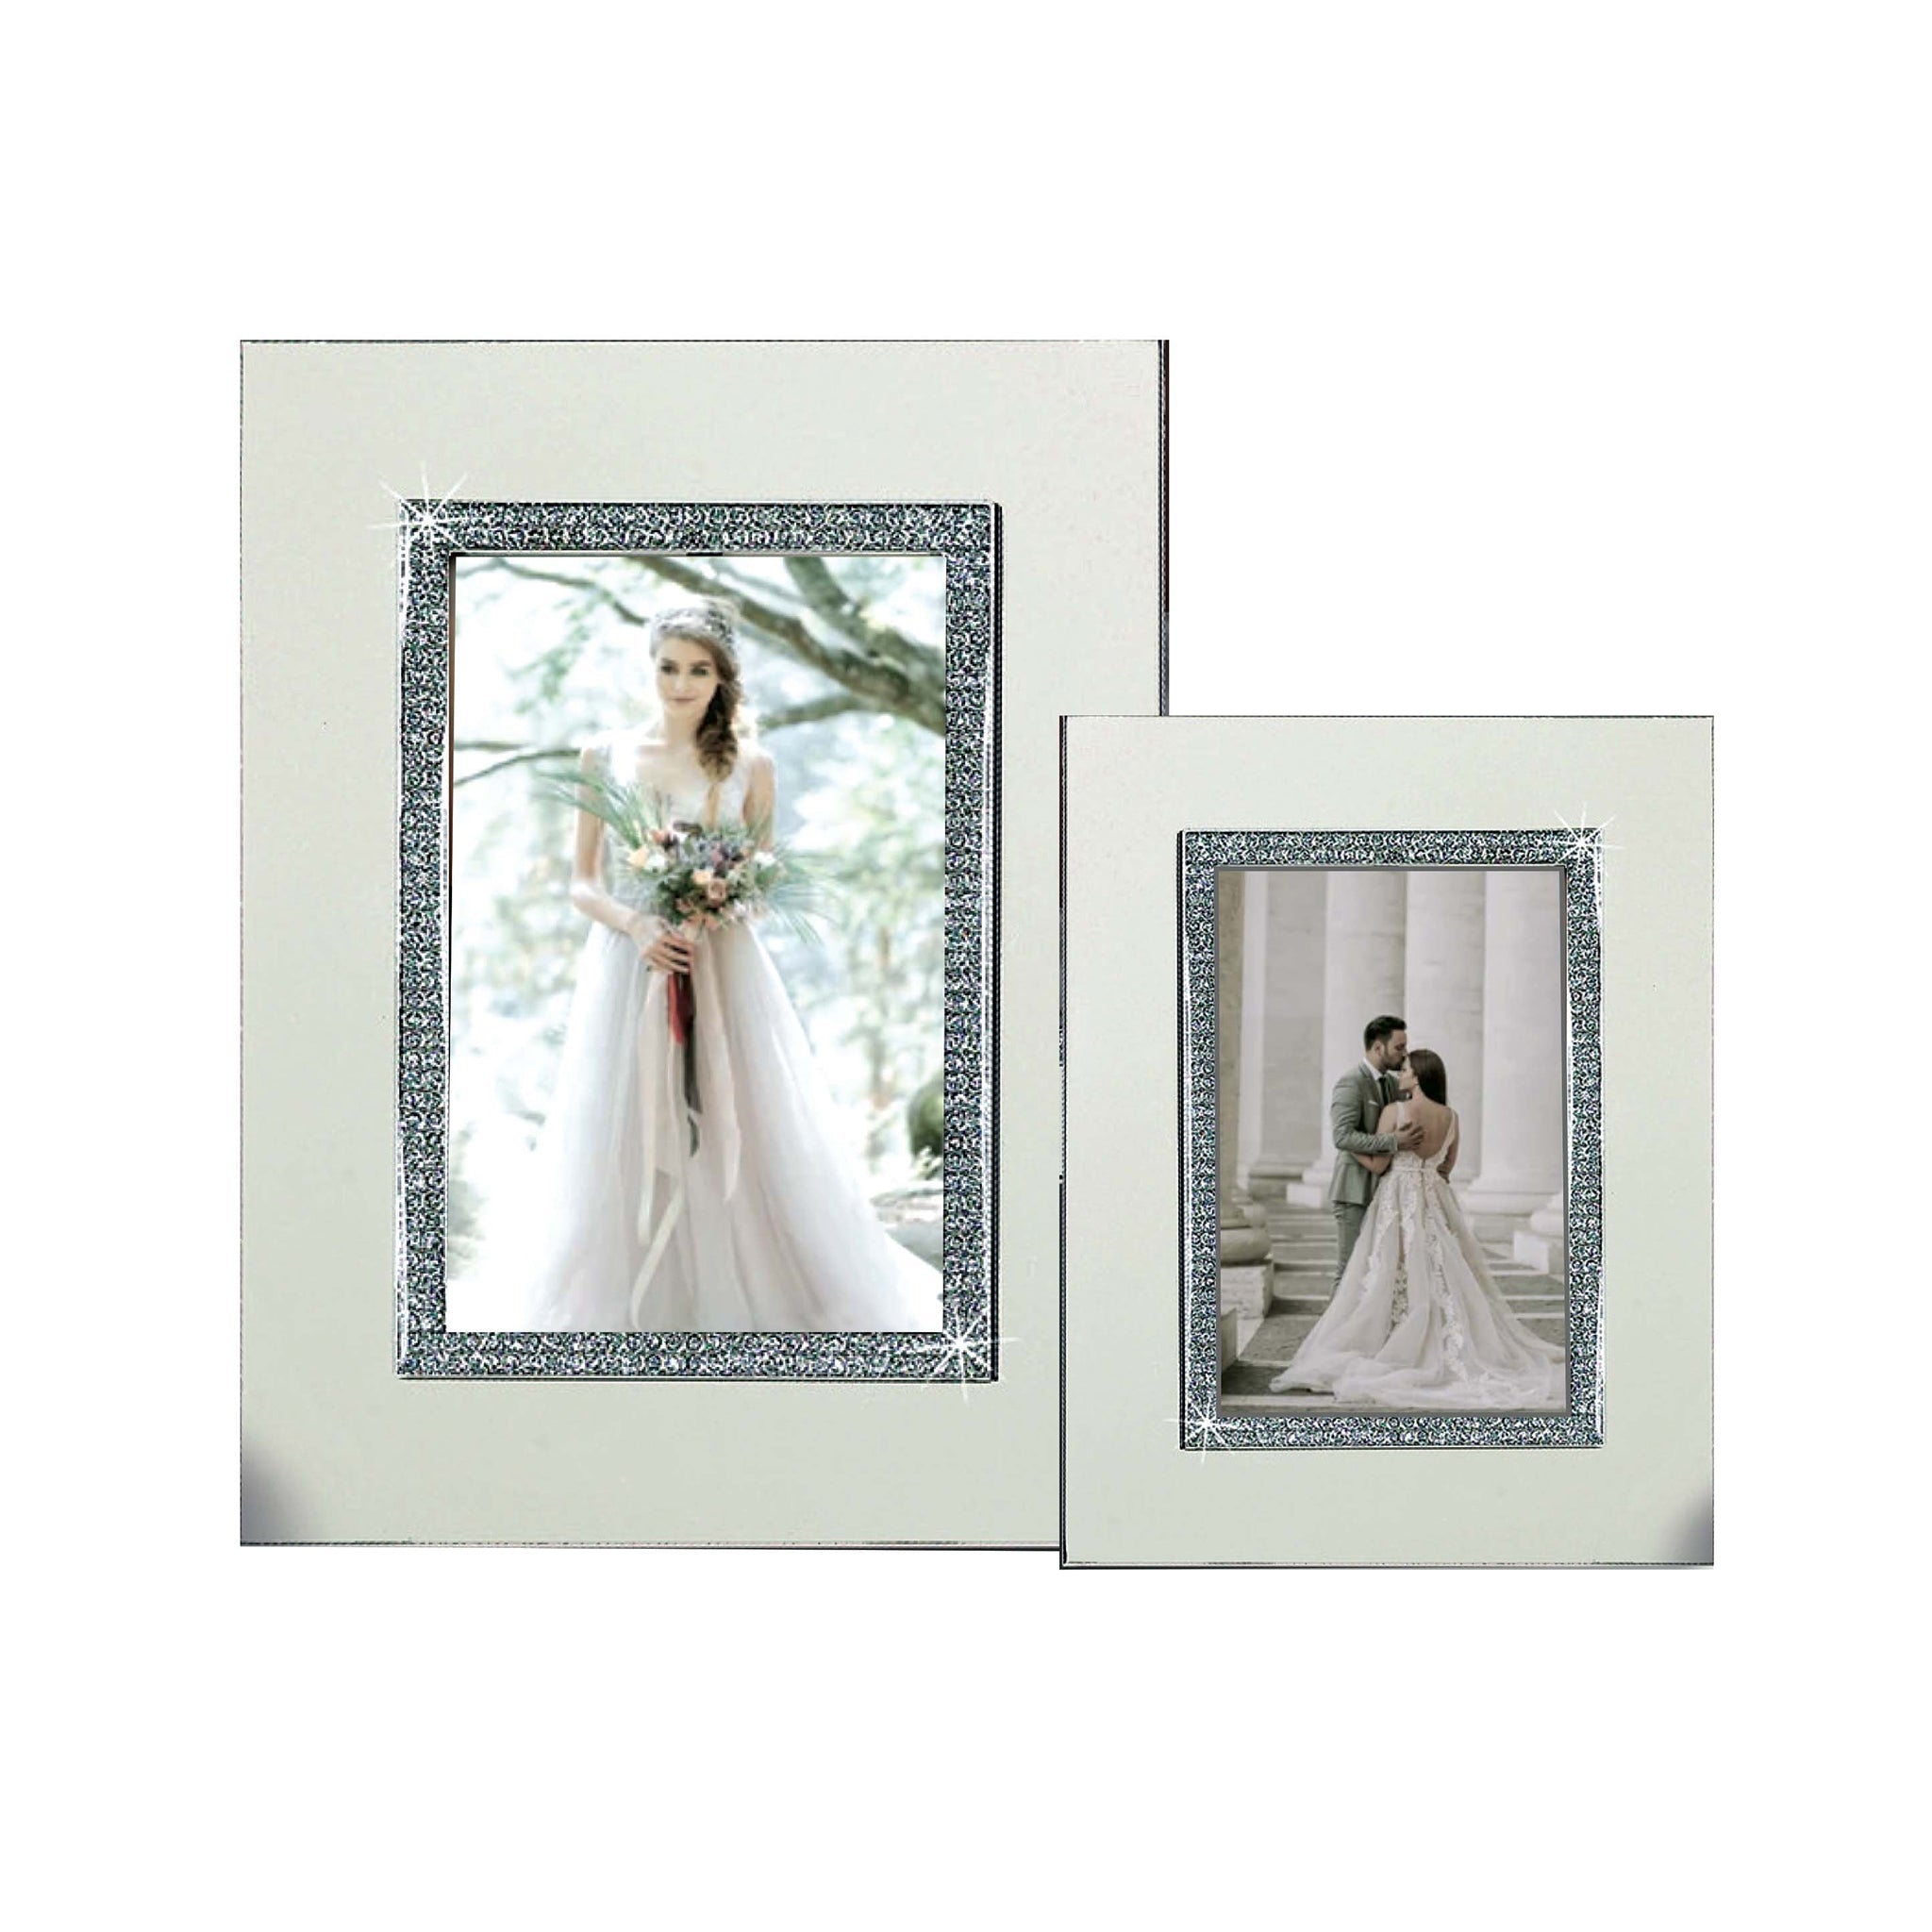 Creative Gifts Giftware Wide Border Glitter Galore Frame Holds 8" X 10" Photo